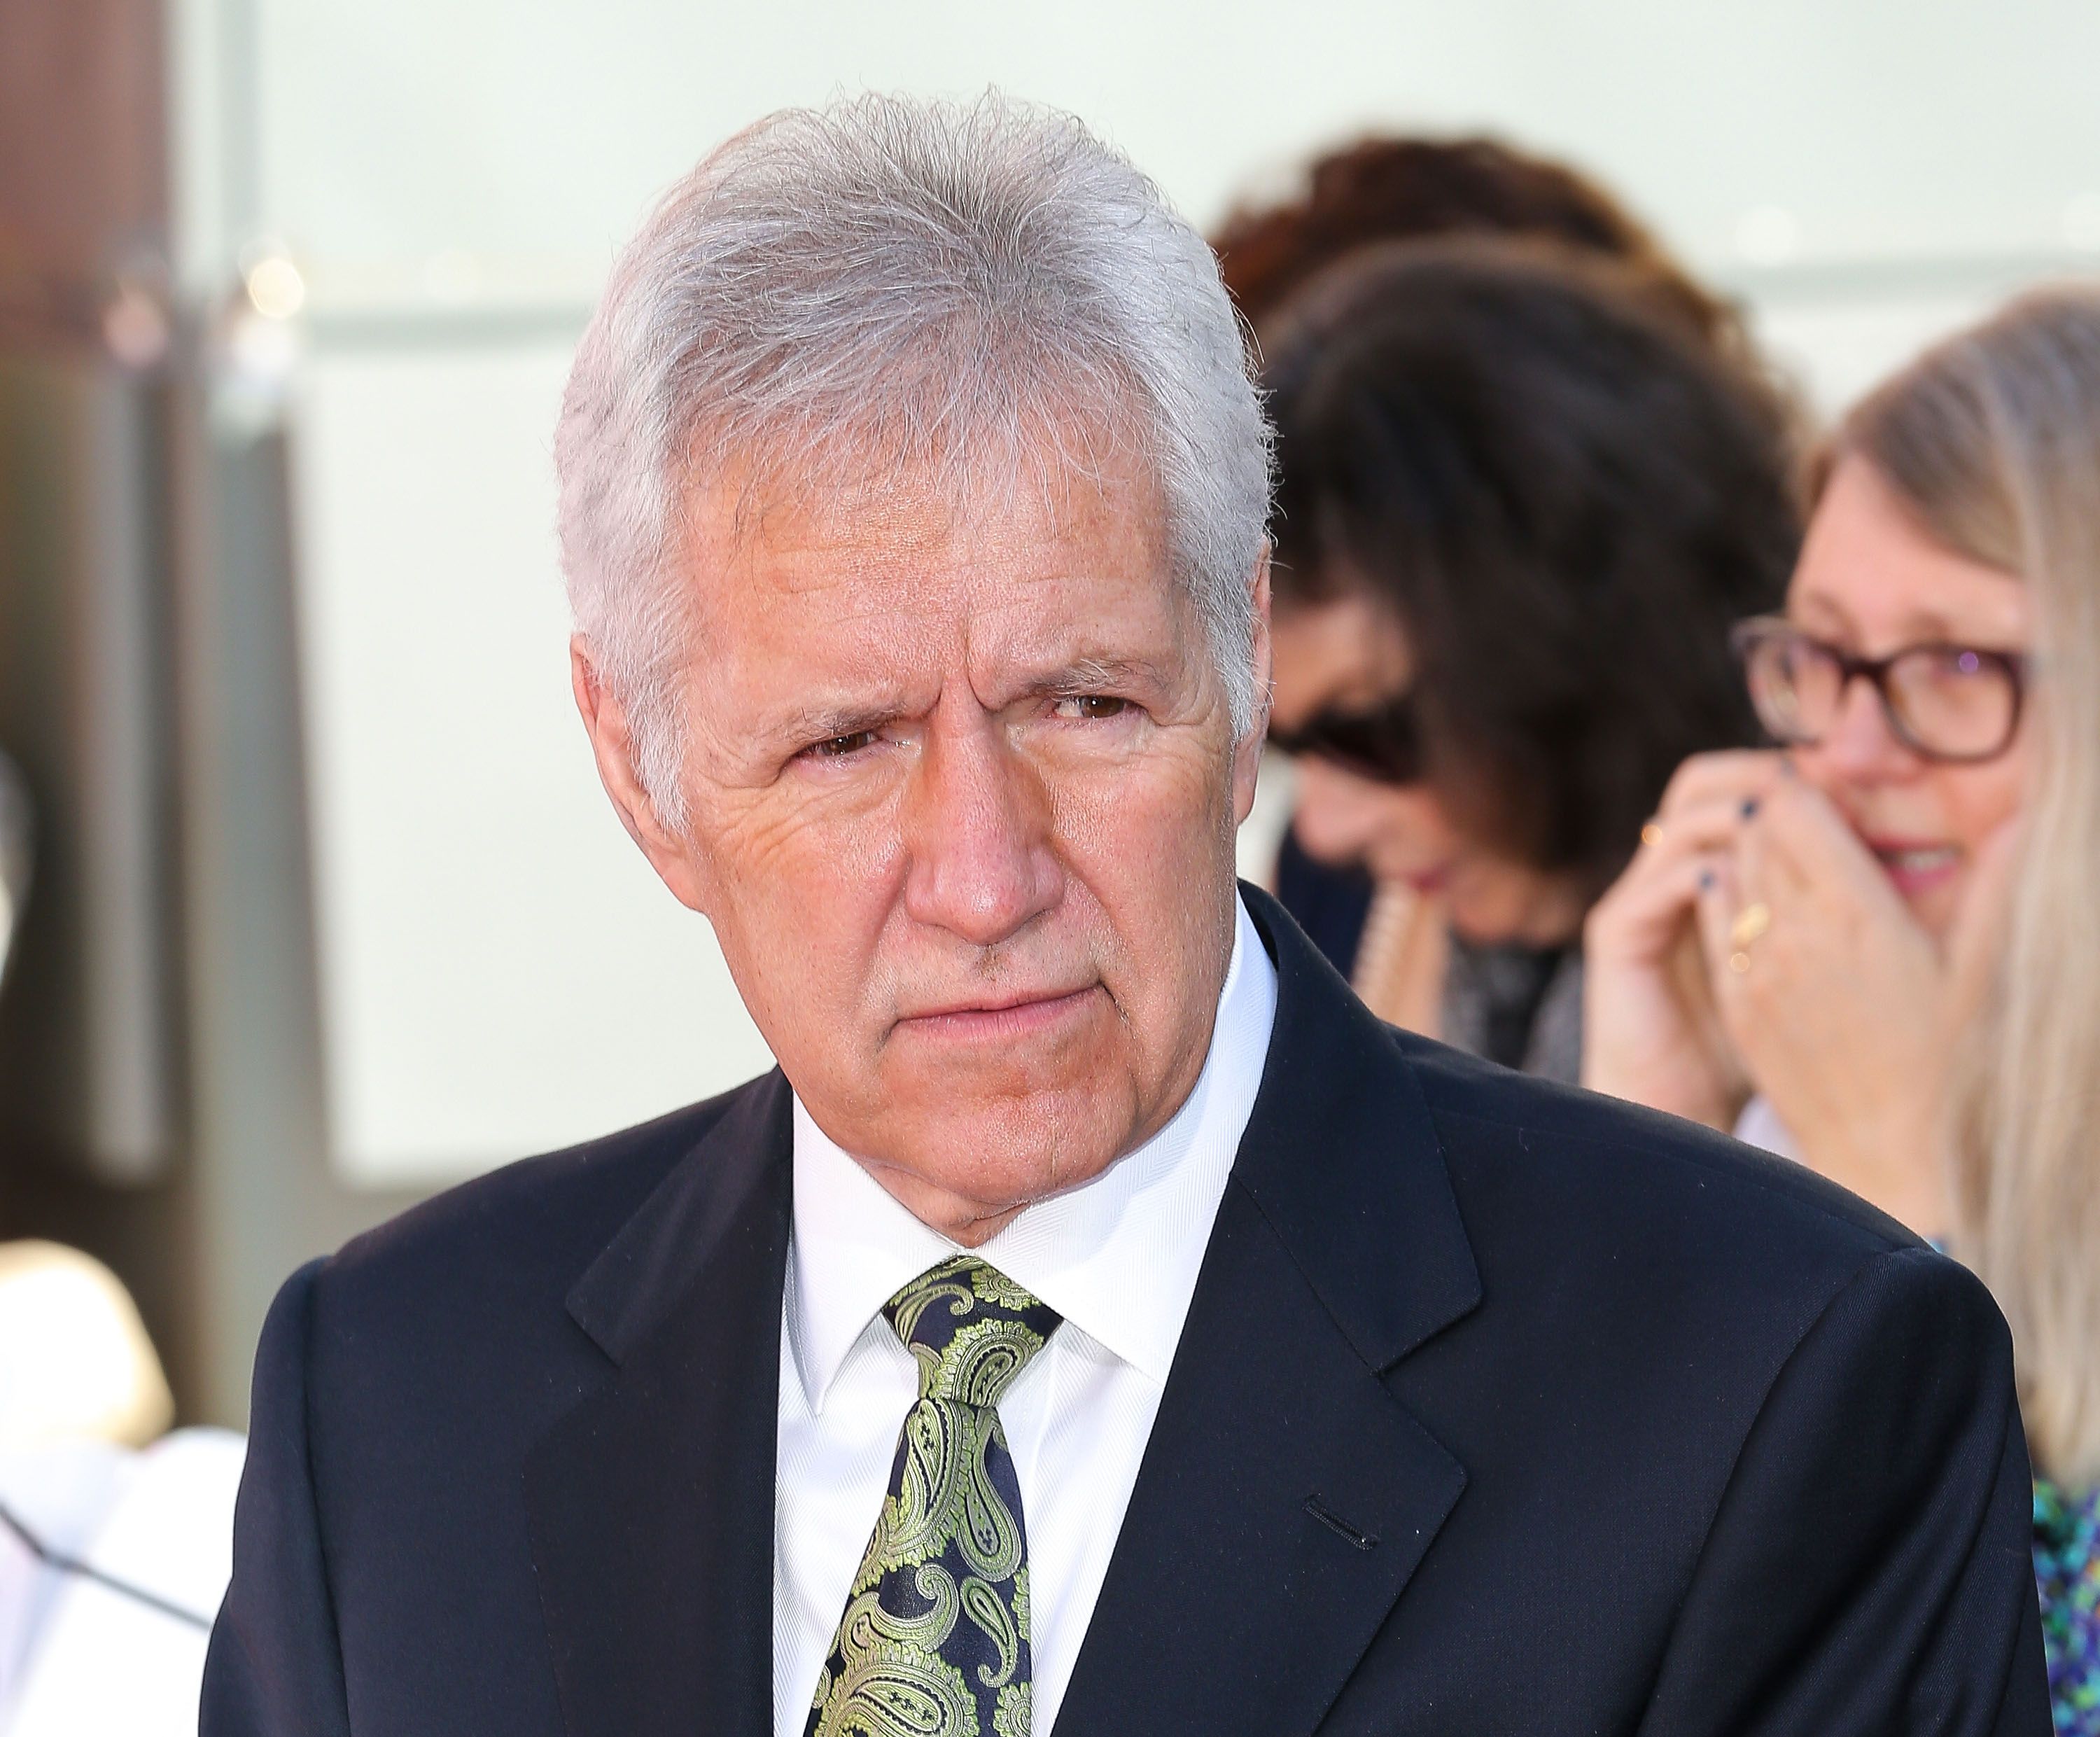 Alex Trebek at the TCM hand and footprint ceremony of  Christopher Plummer on March 27, 2015 | Photo: Getty Images